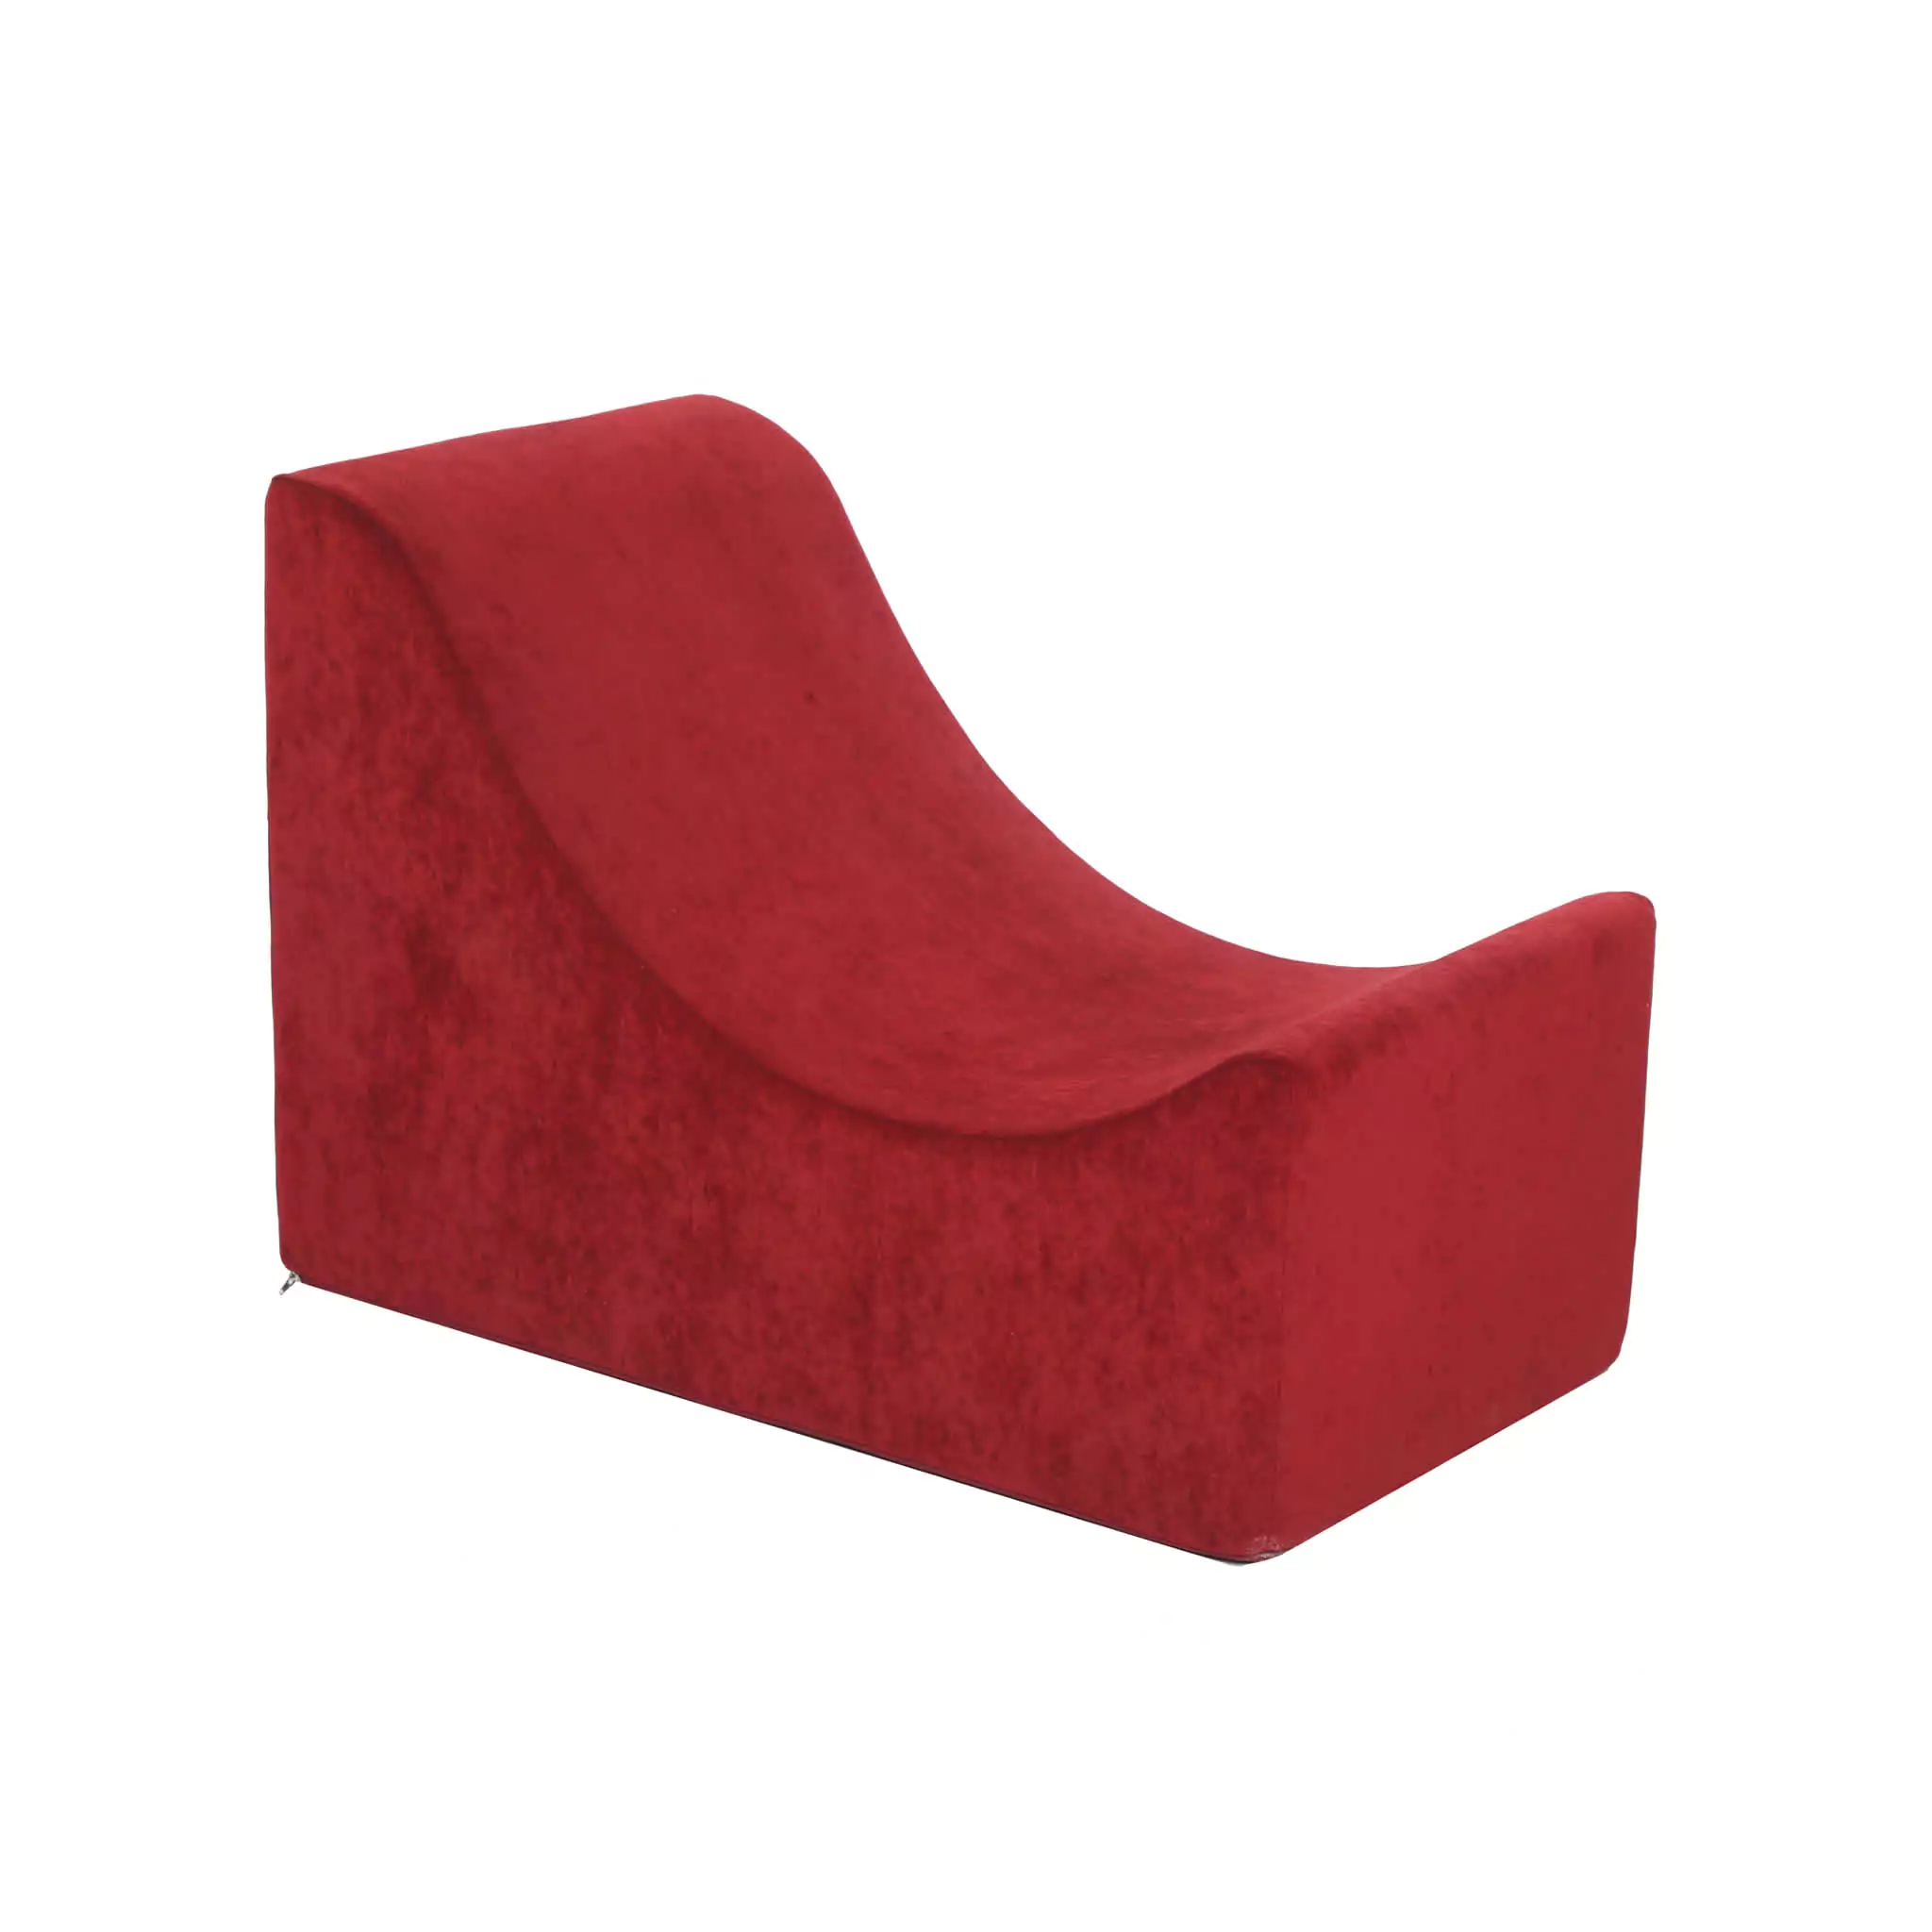 Simko Seating Products Foyer Seat Planeterium